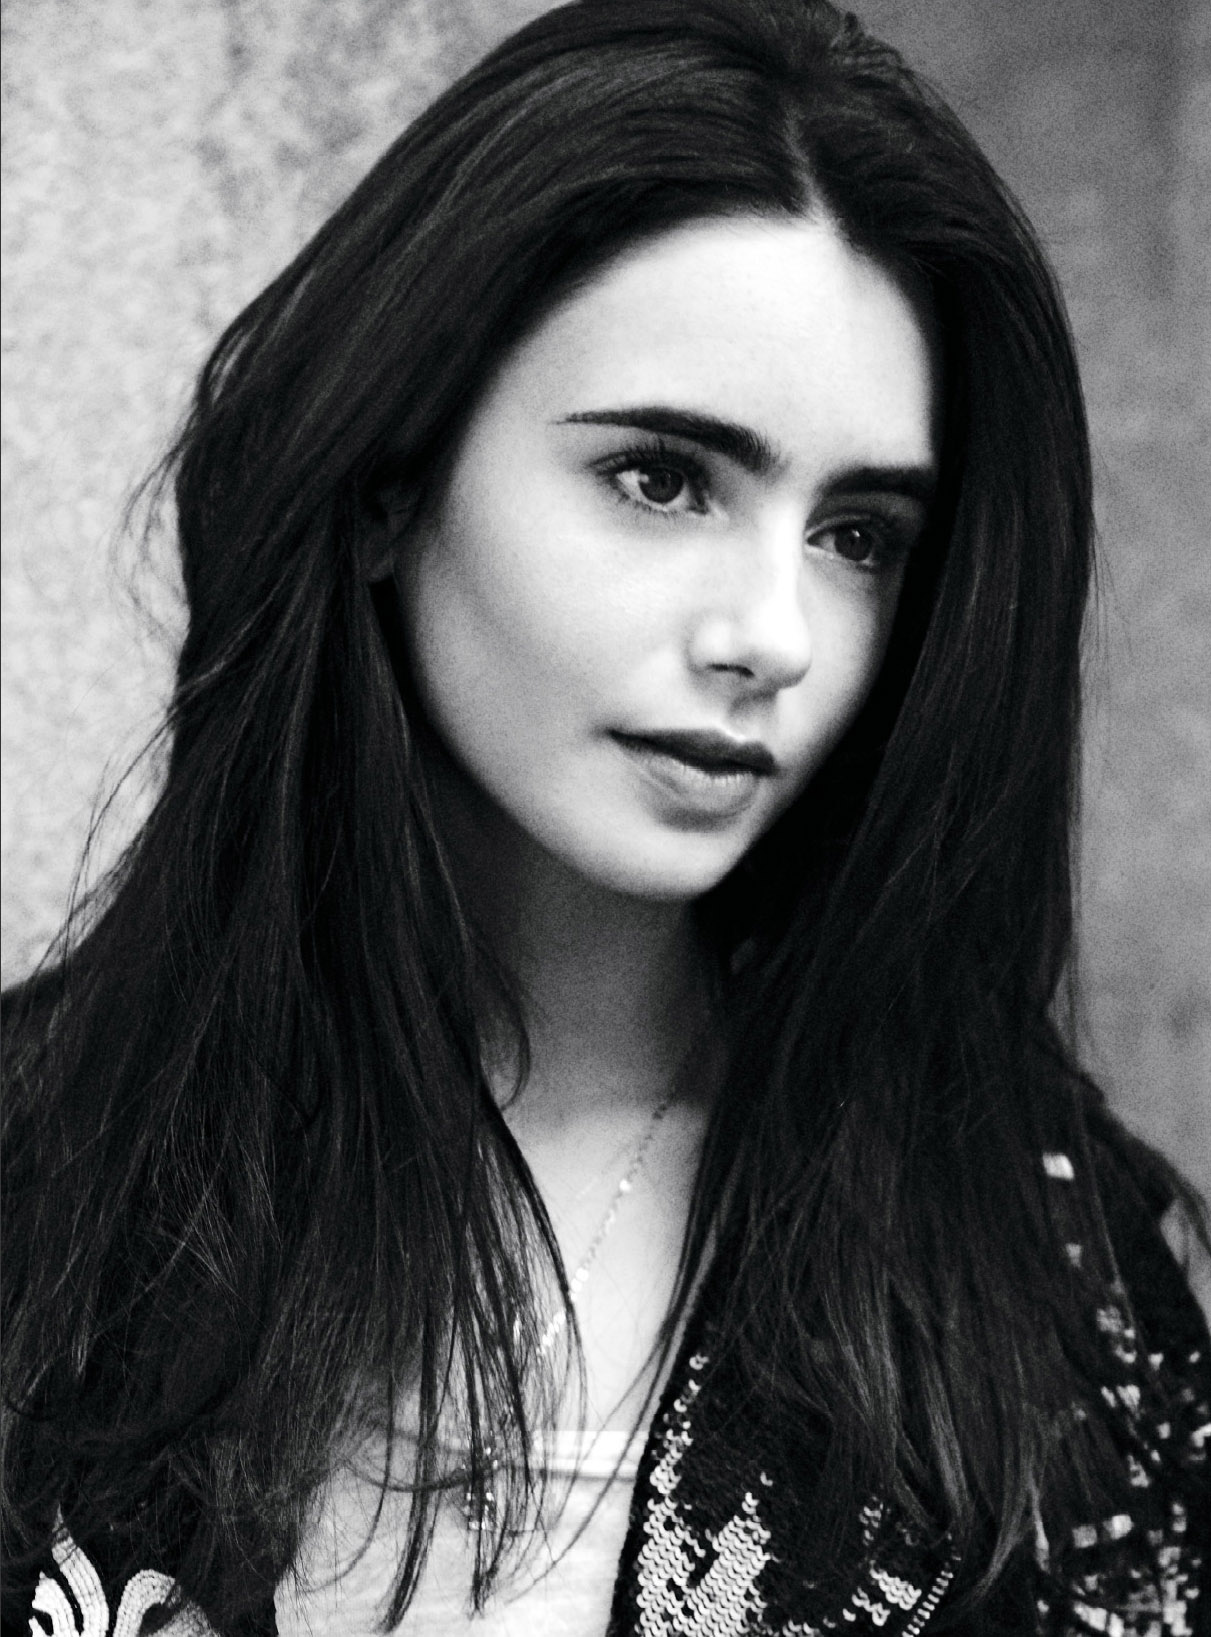 Lily Collins ASOS Magazine October 2011 Photoshoot - Lily Collins Photo ...